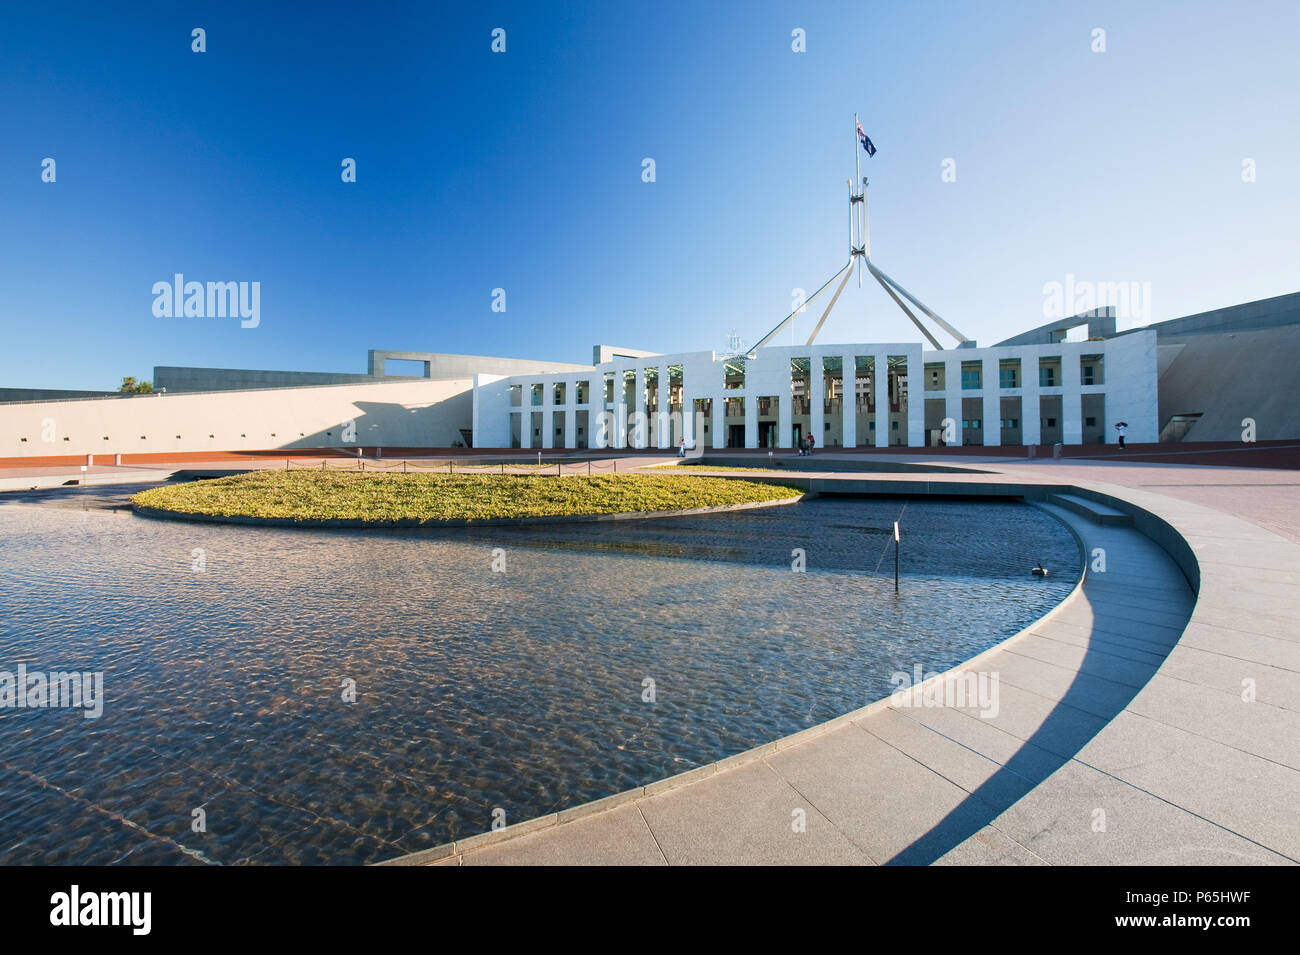 The new Australian parliament building in Canberra, Australia. Stock Photo